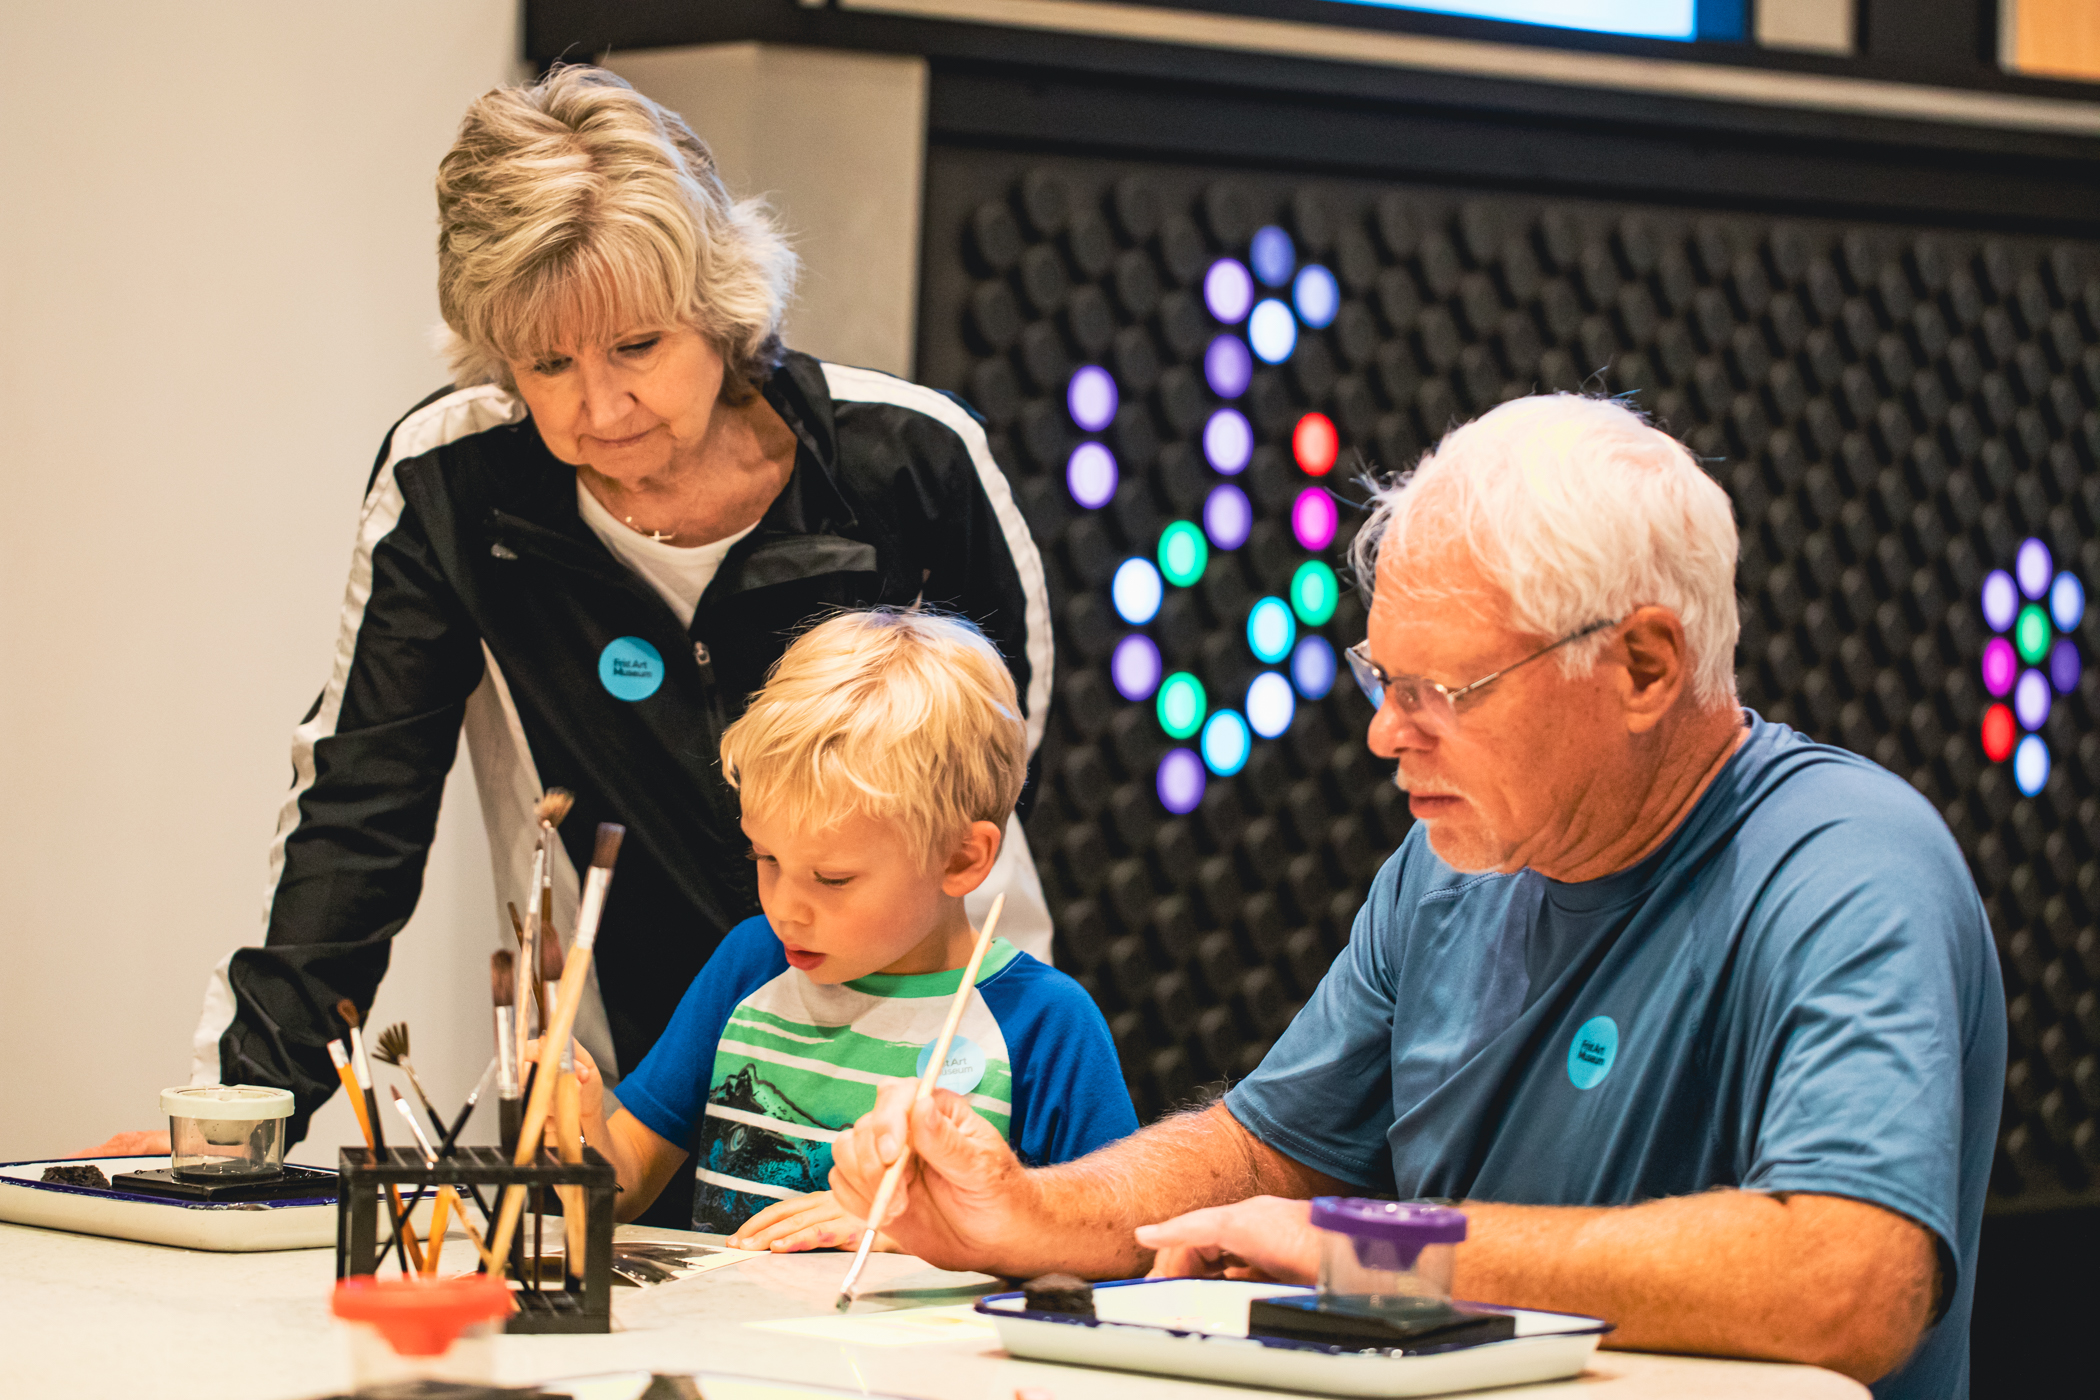 Grandparents and their grandson painting at a table